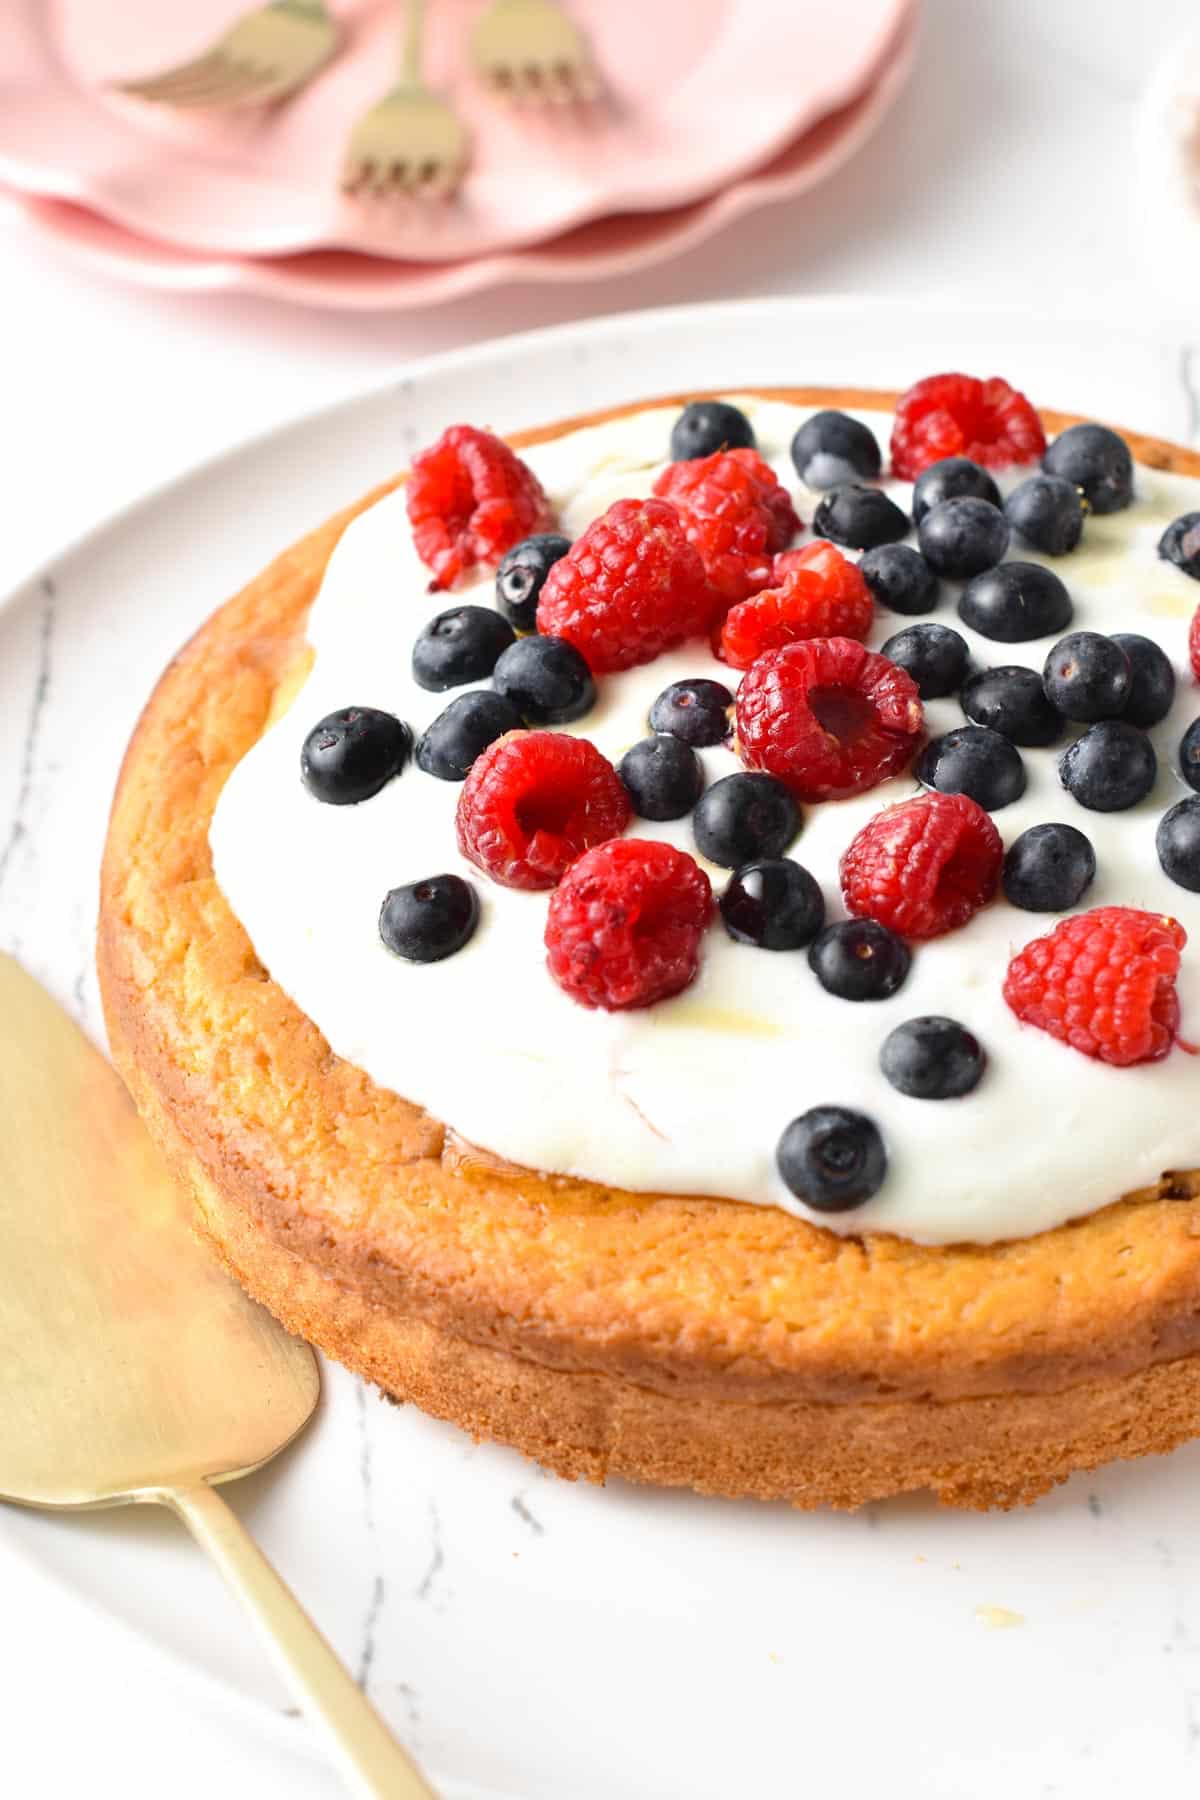 Sugar-free cake on a marbled plate decorated with white frosting, blueberries, and raspberries next to a golden flat spatula.